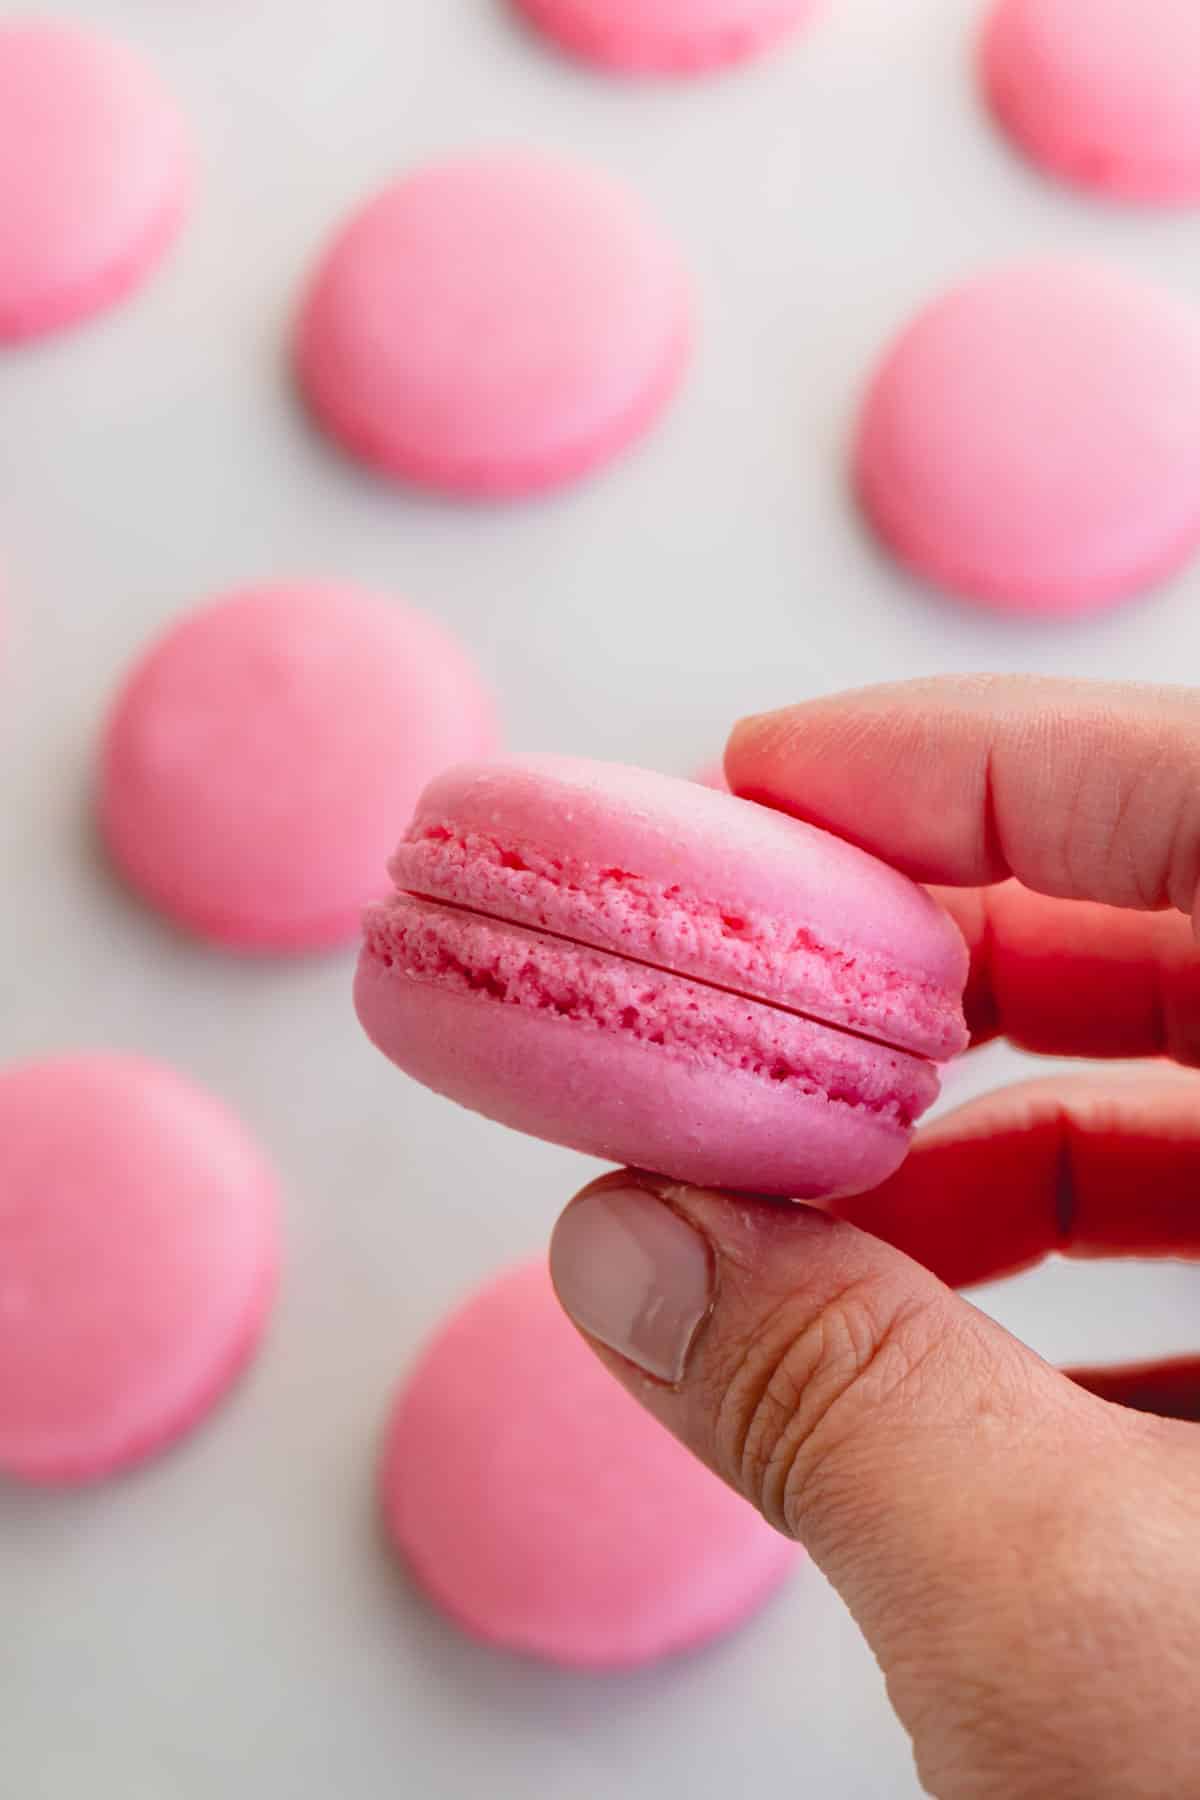 Baked pink macaron shells held in a hand.